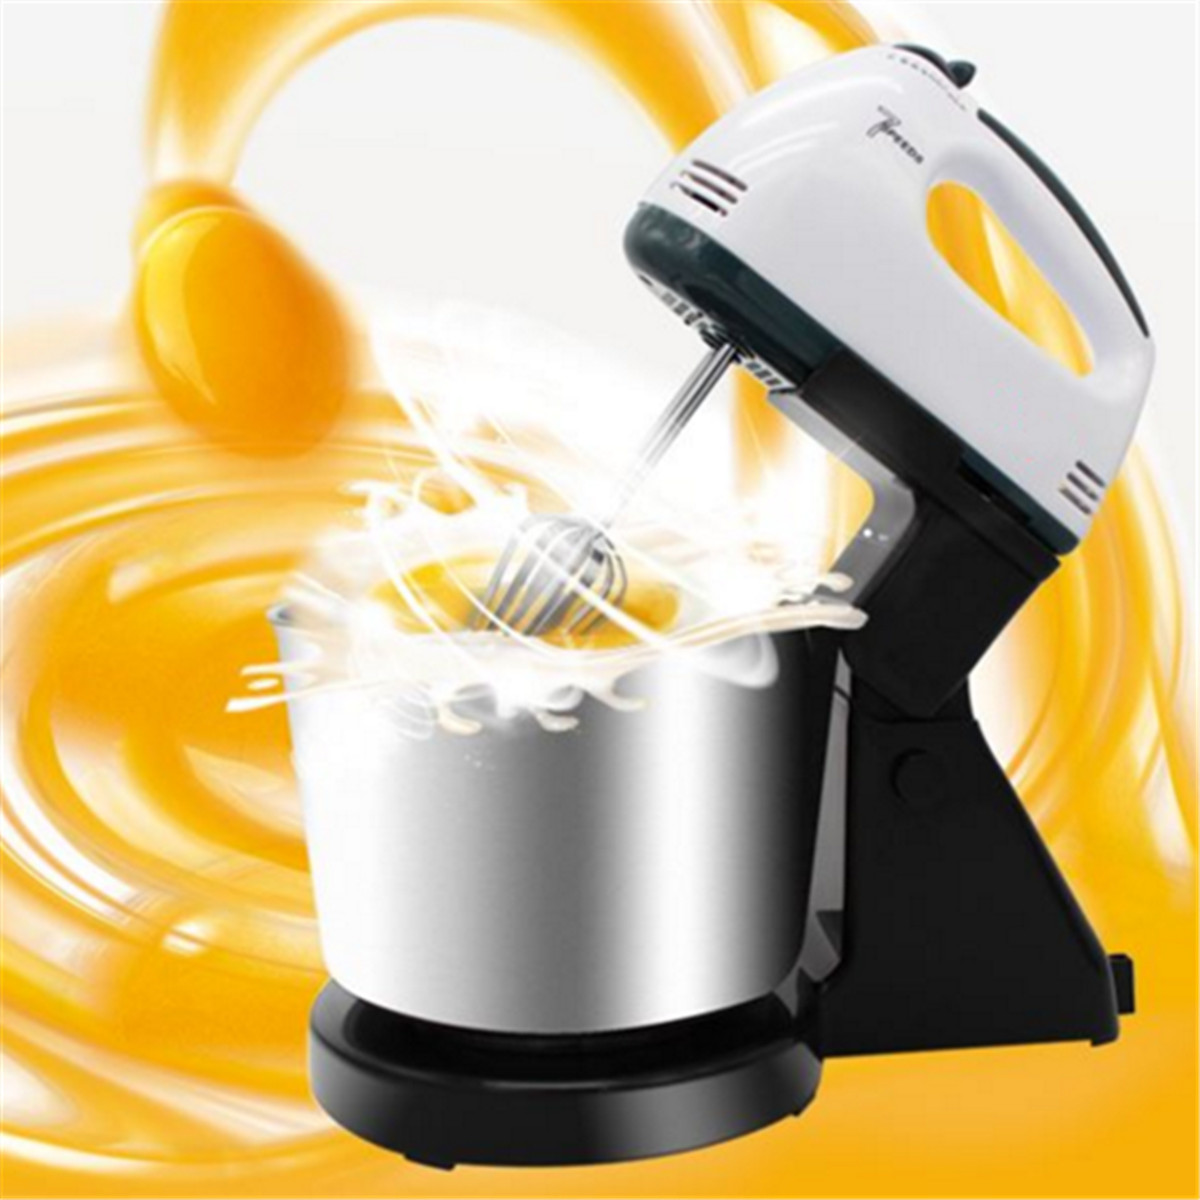 7 Speed Electric Egg Beater Dough Cakes Bread Egg Stand Mixer + Hand Blender + Bowl Food Mixer Kitchen Accessories Egg Tools 47